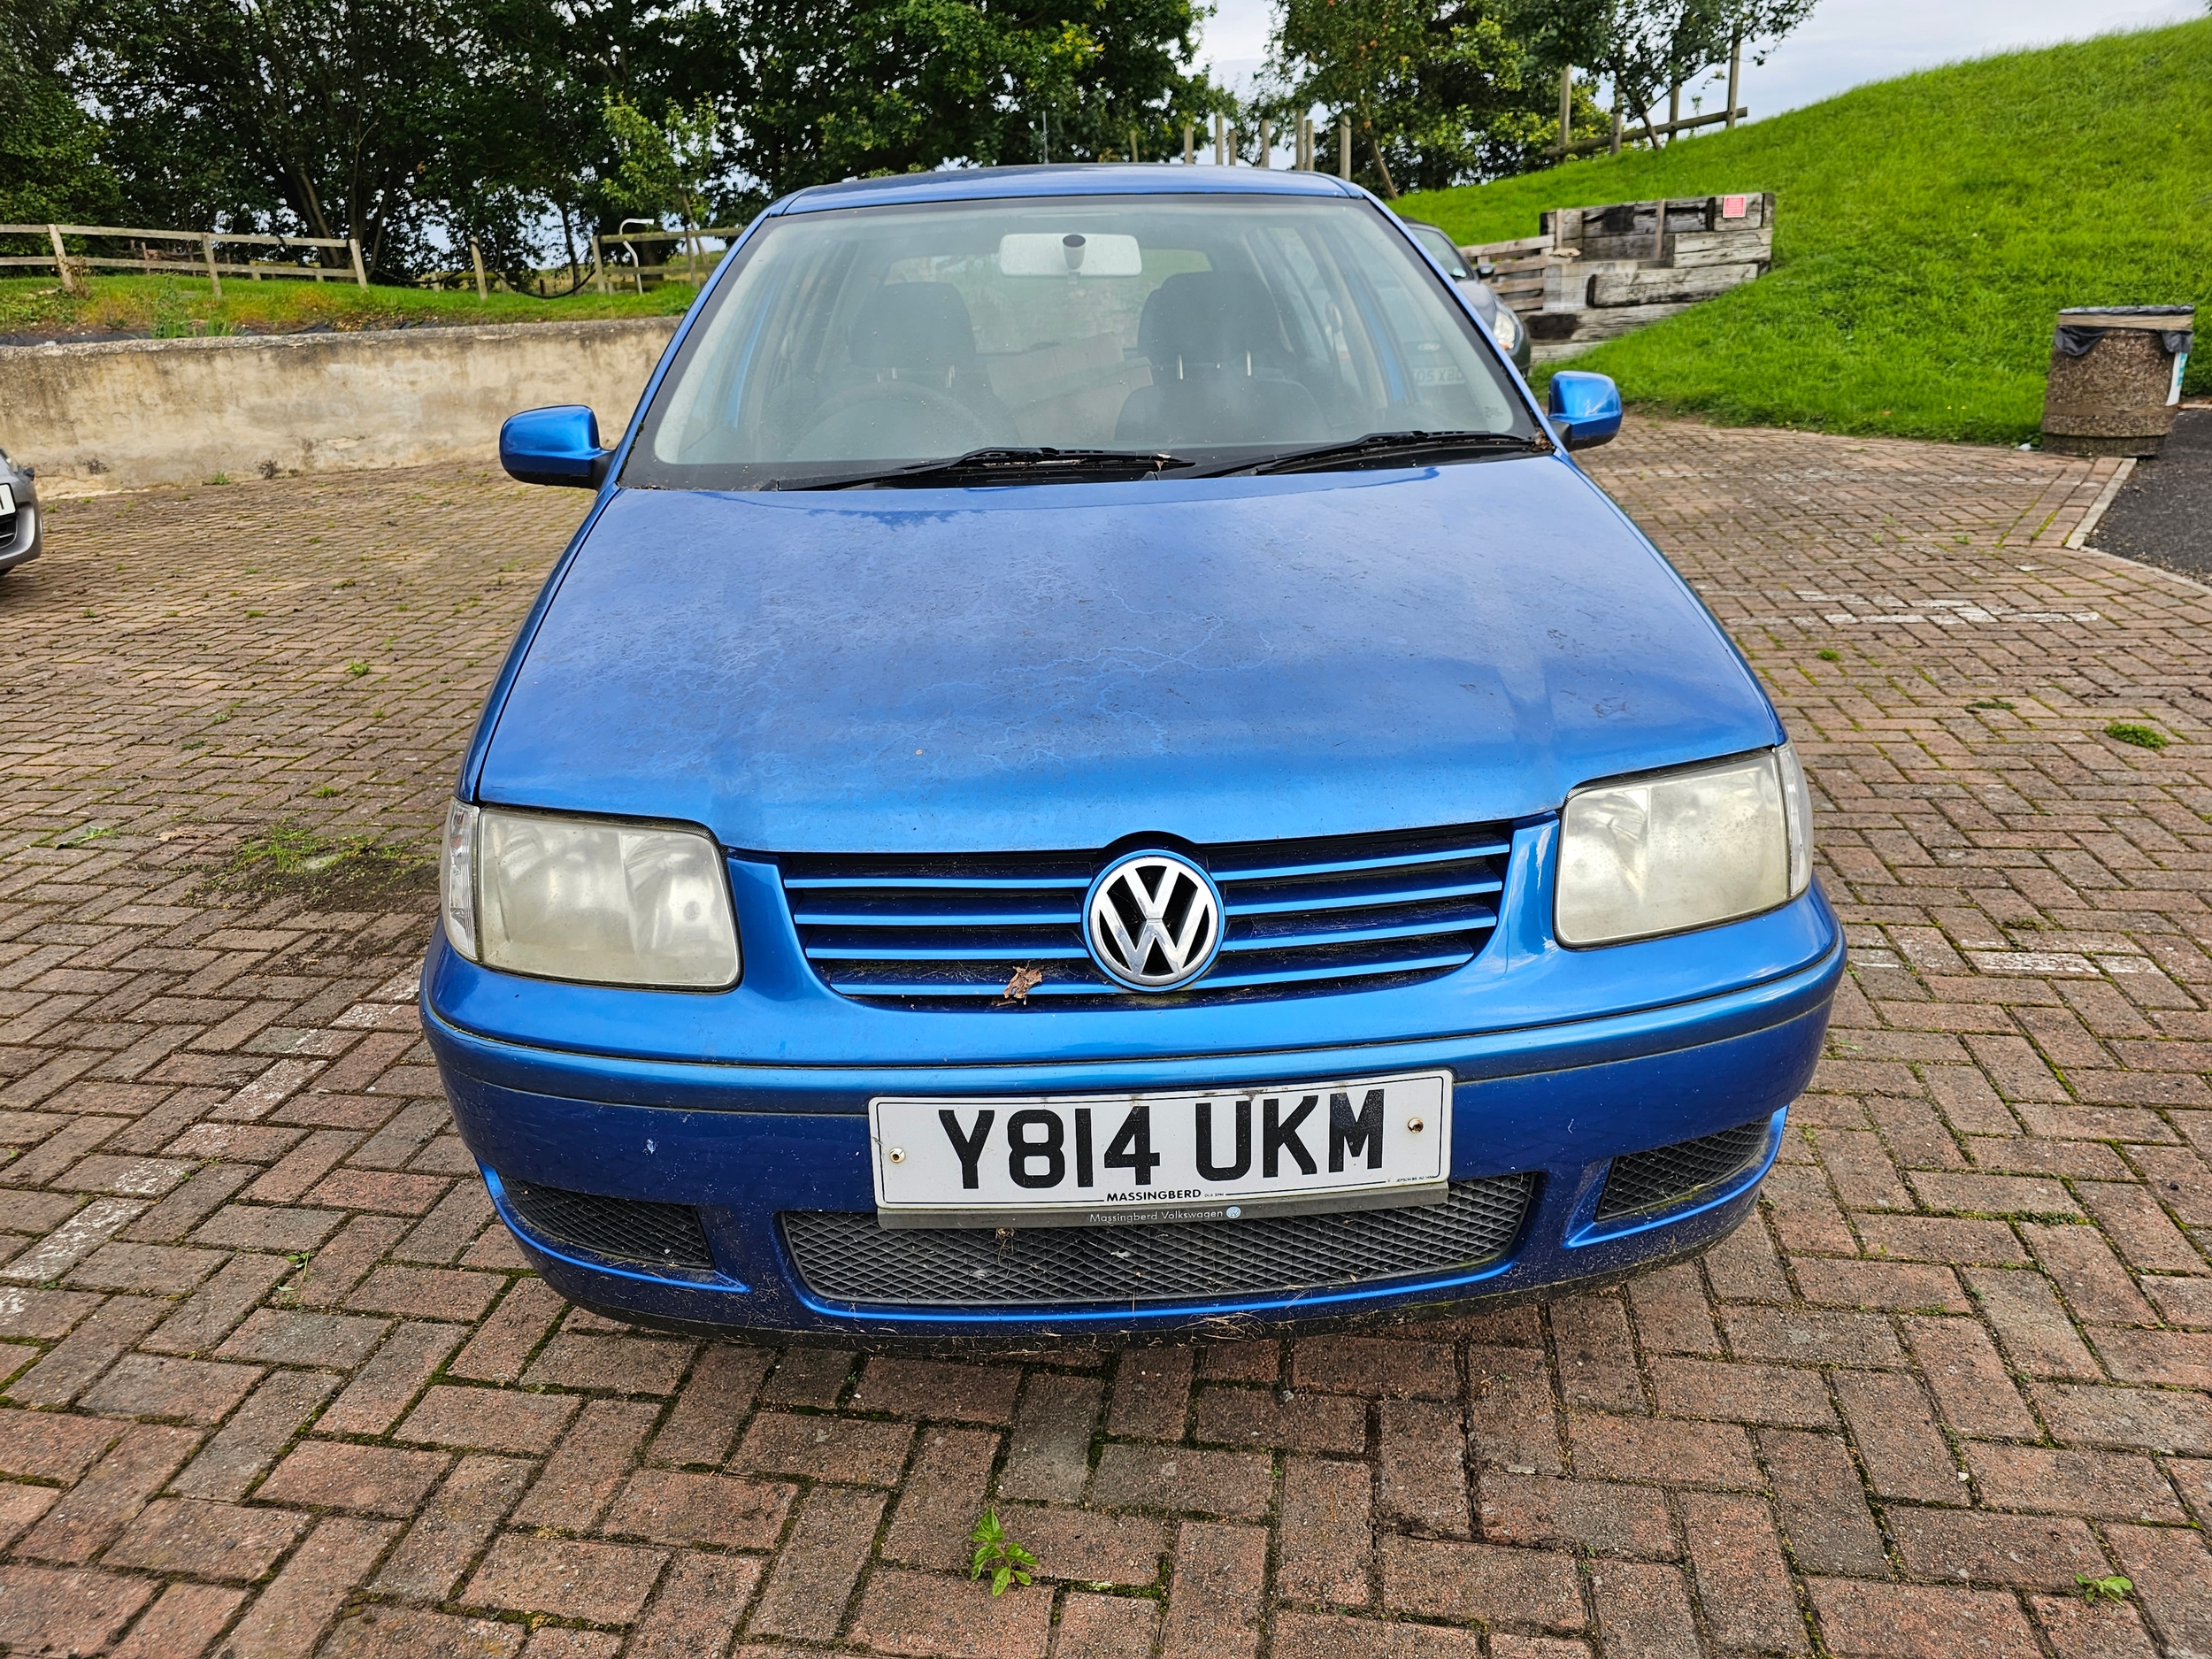 2001 VW POLO, 1390cc. Registration number Y814UKM. VIN number WVWZZZ6NZ1Y259513. Property of a - Image 3 of 11